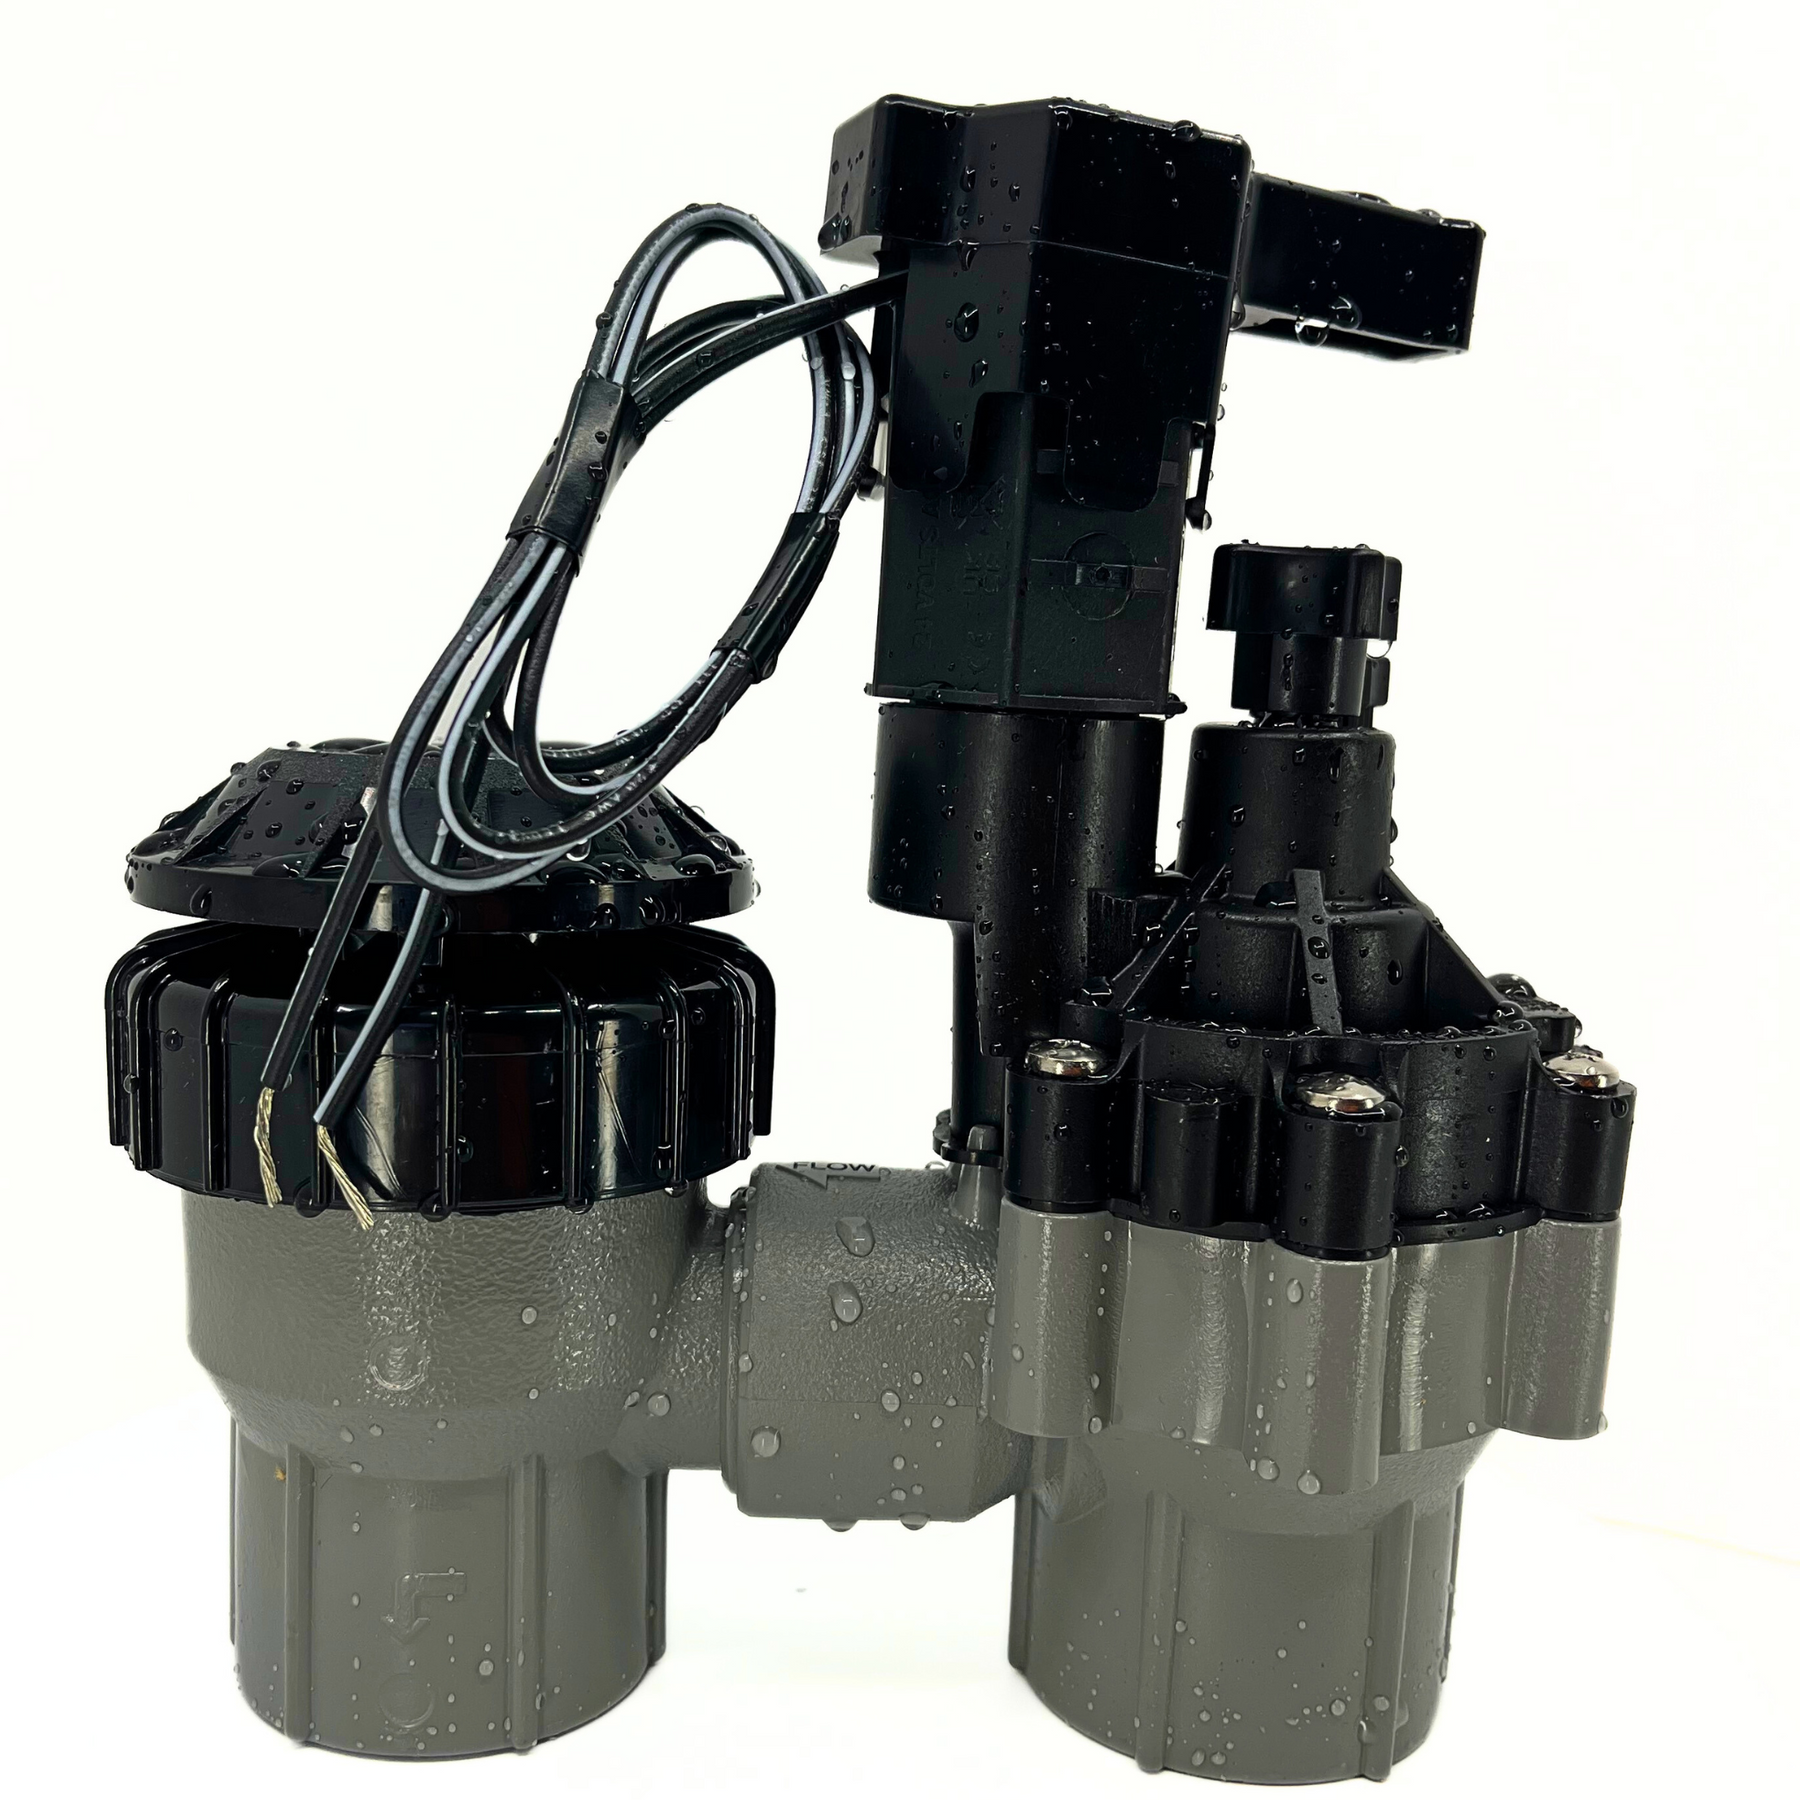 075ASVF - 3/4 in. Plastic Residential Anti-Siphon Irrigation Valve with  Flow Control - 3/4 in. FPT Threads